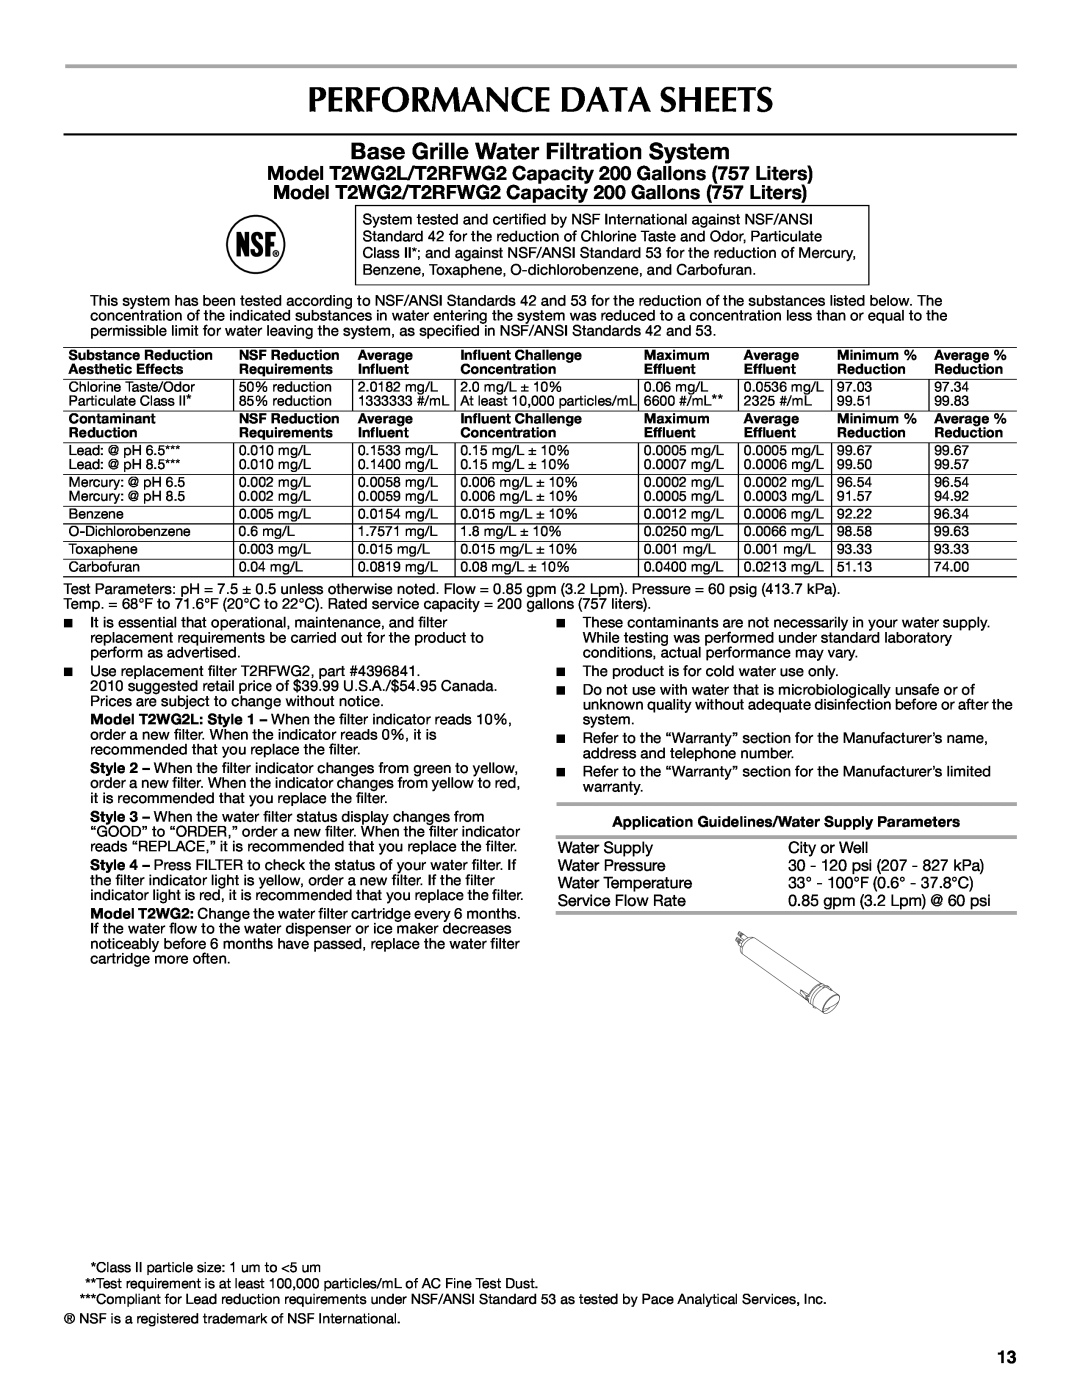 Maytag W10321476A installation instructions Performance Data Sheets, Base Grille Water Filtration System 